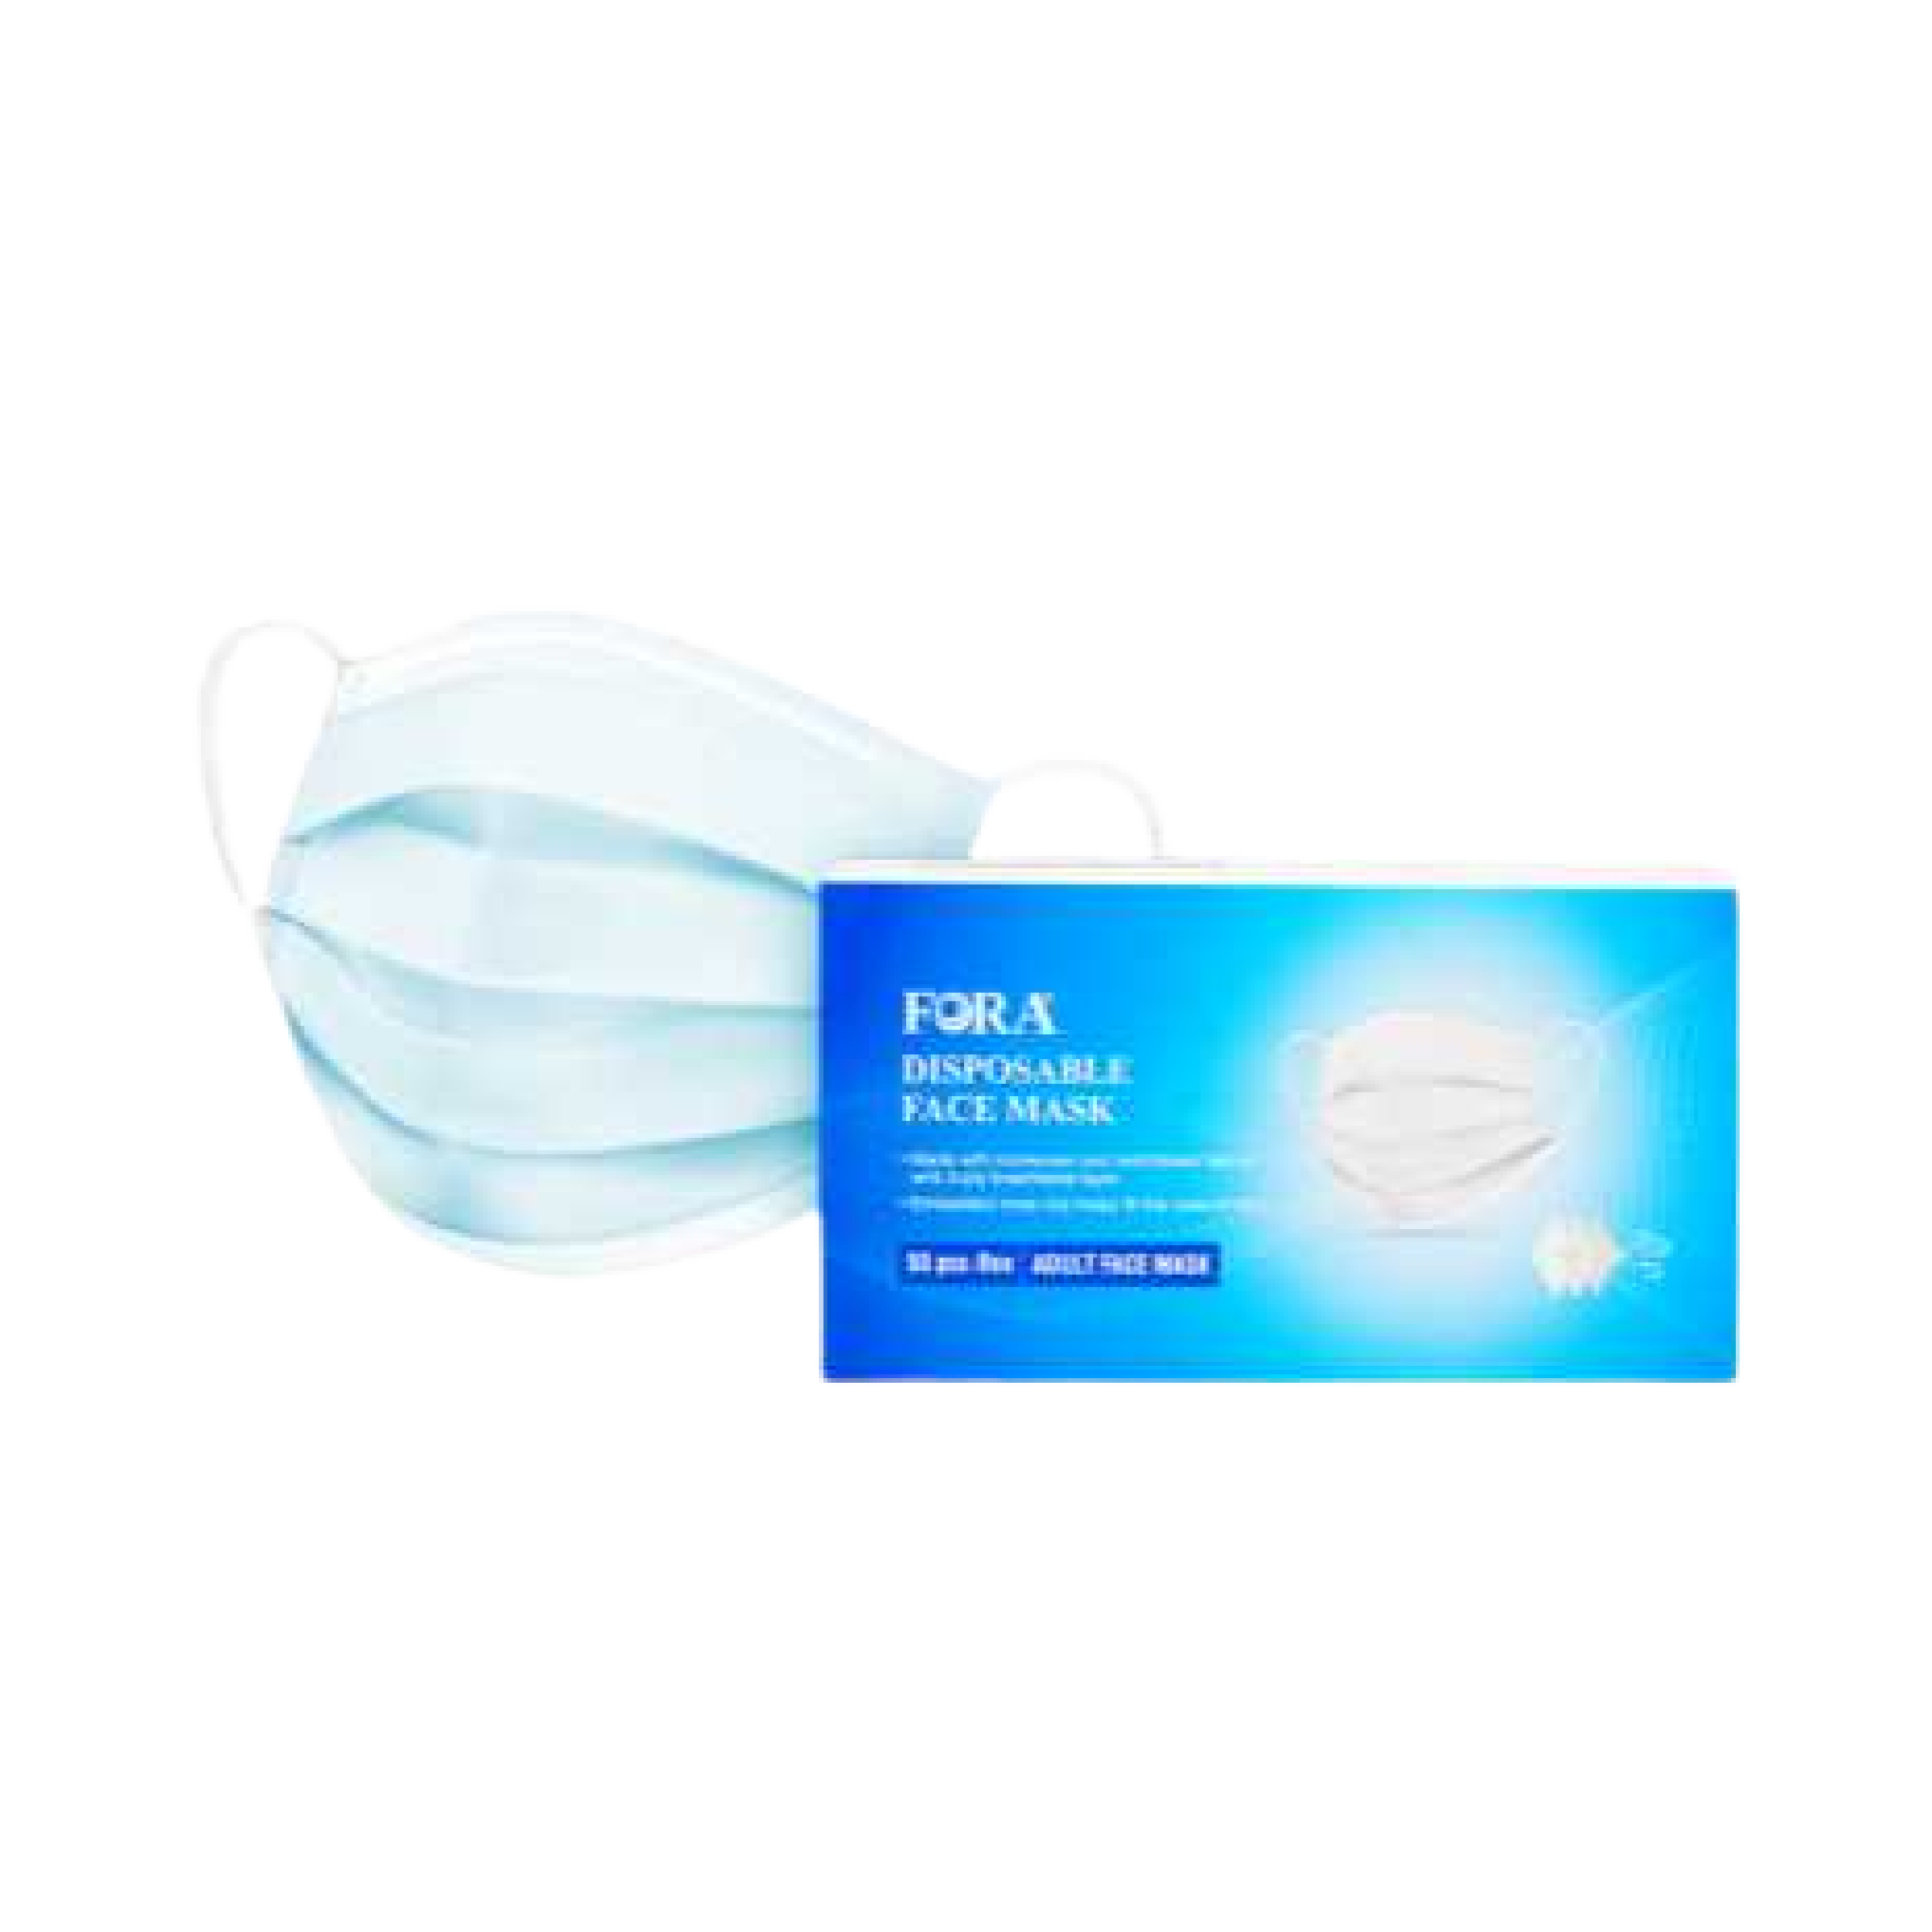 FORA 3Ply Disposable Face Masks, Breathable Face Mask Protective PPE Elastic Ear-loop Face Cover Mask for Adult.(50pcs/Box)